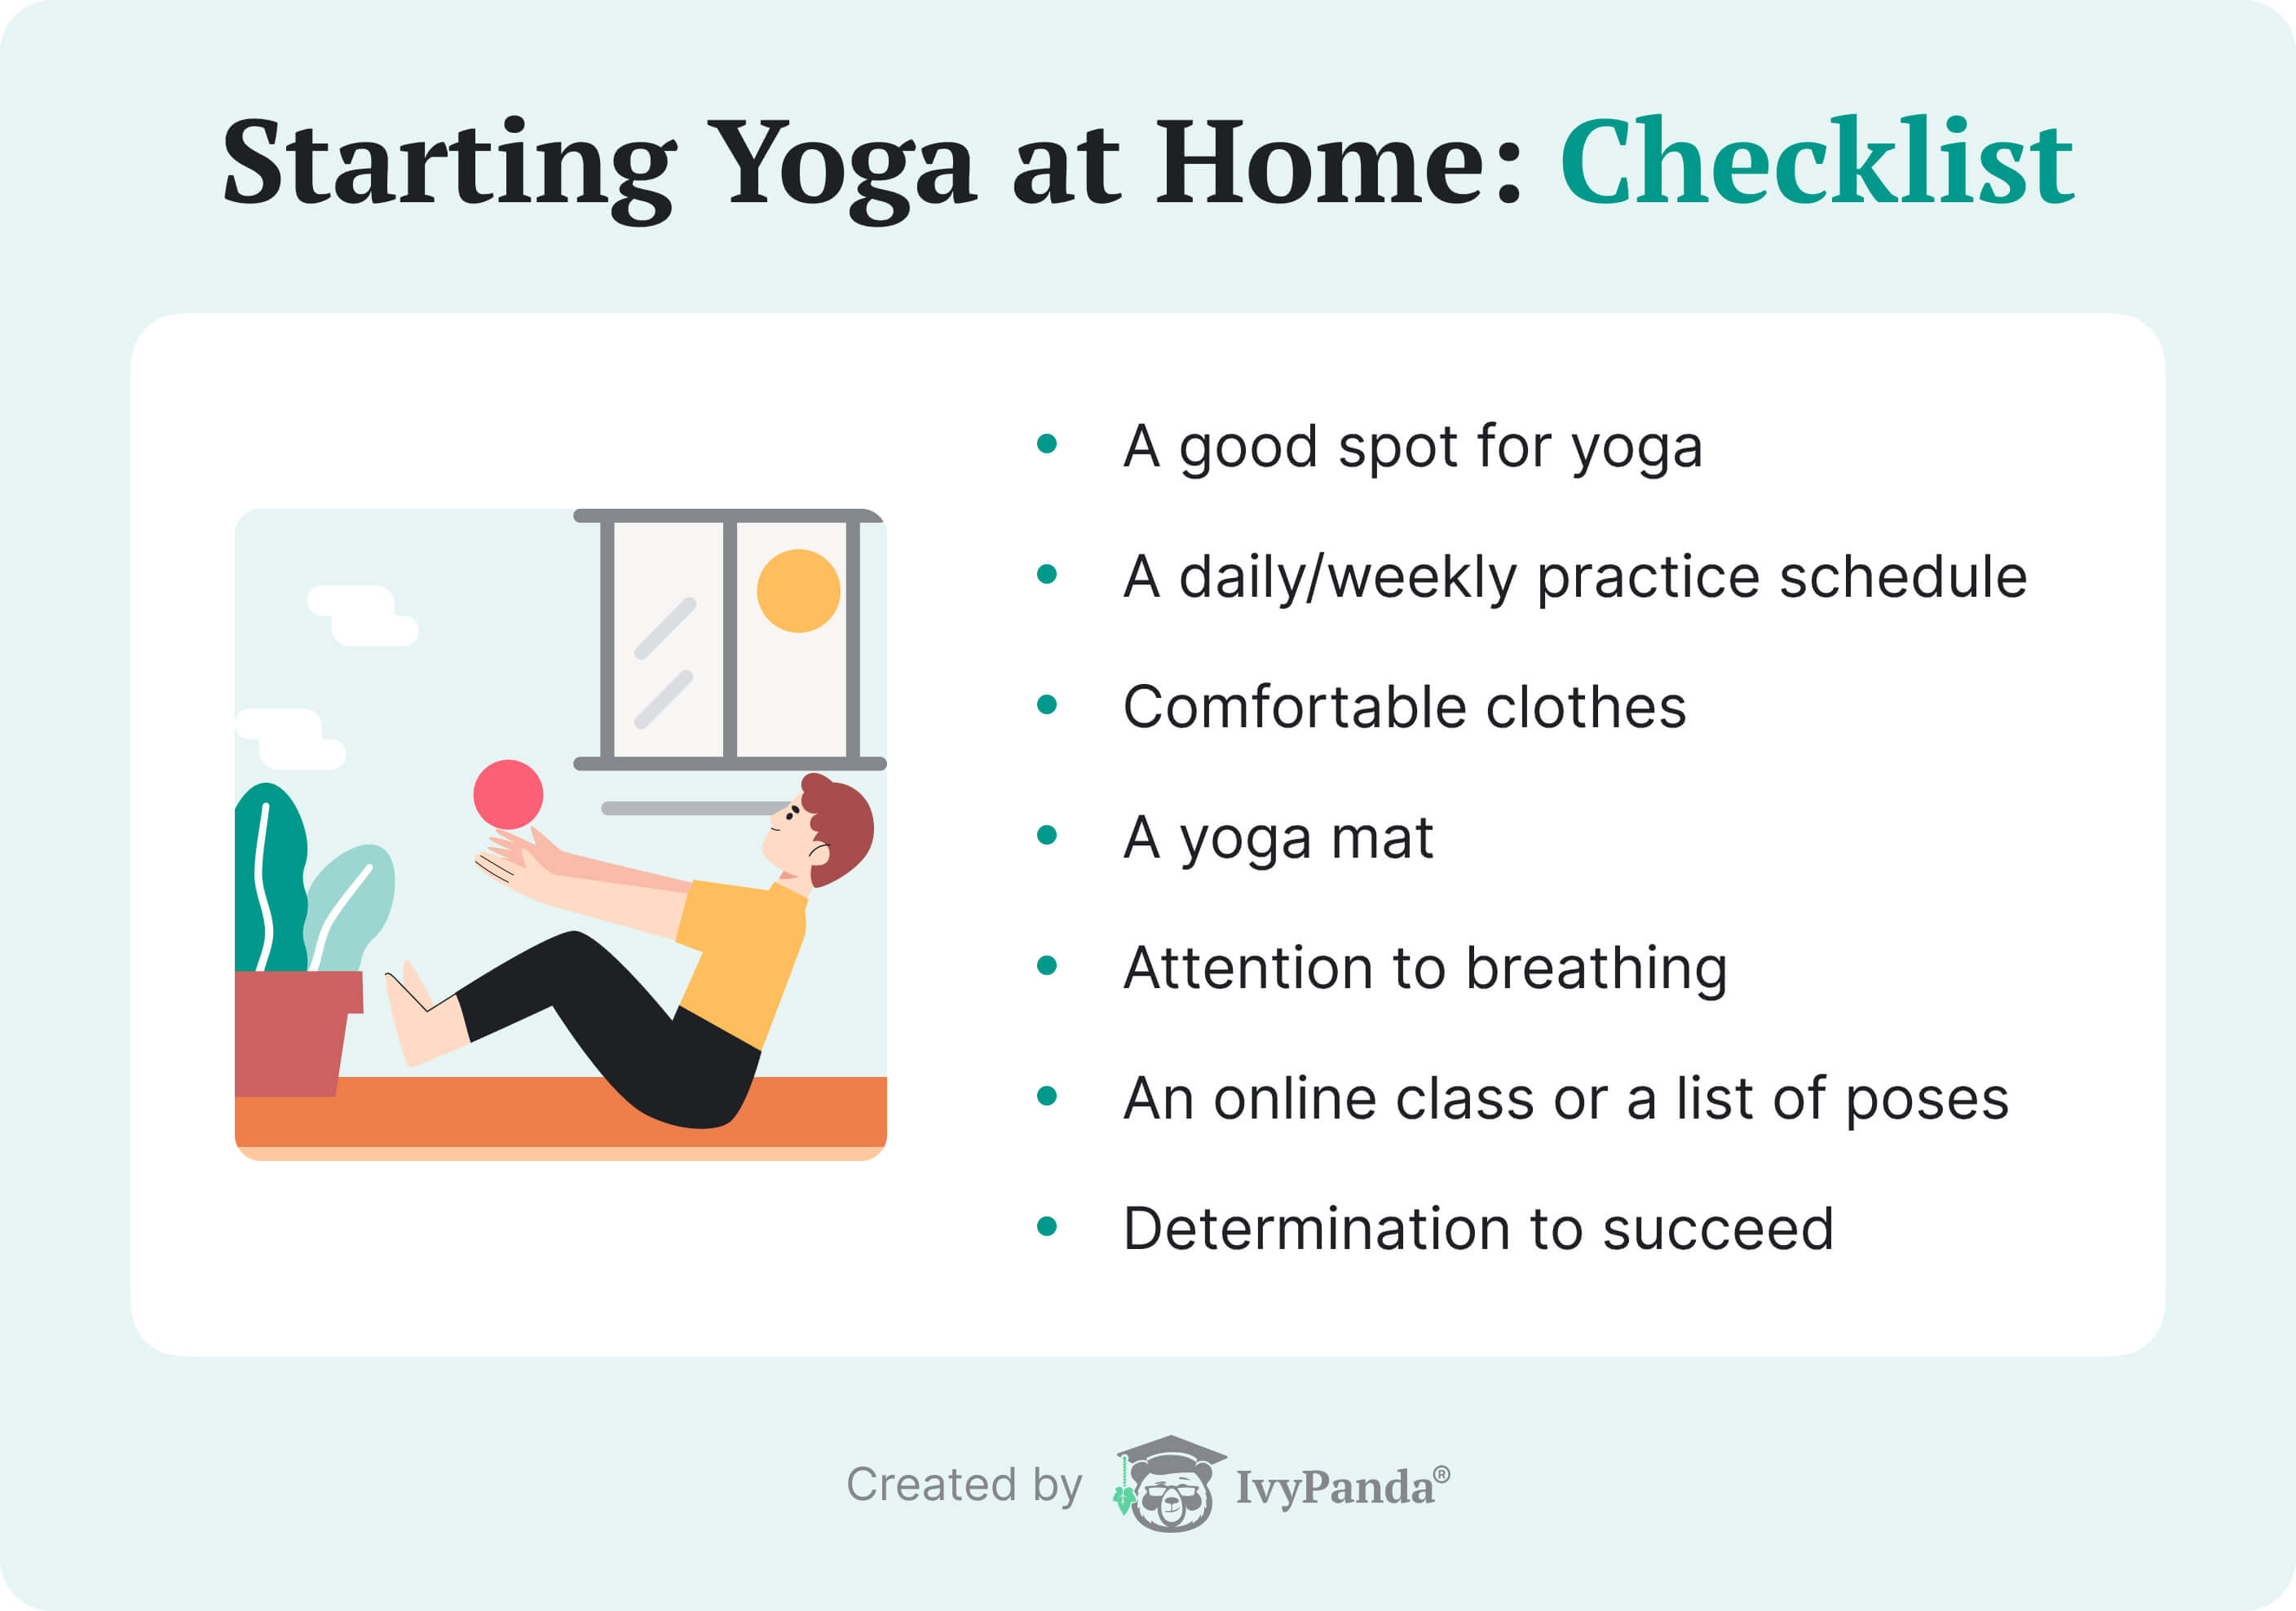 Checklist on starting yoga at home.